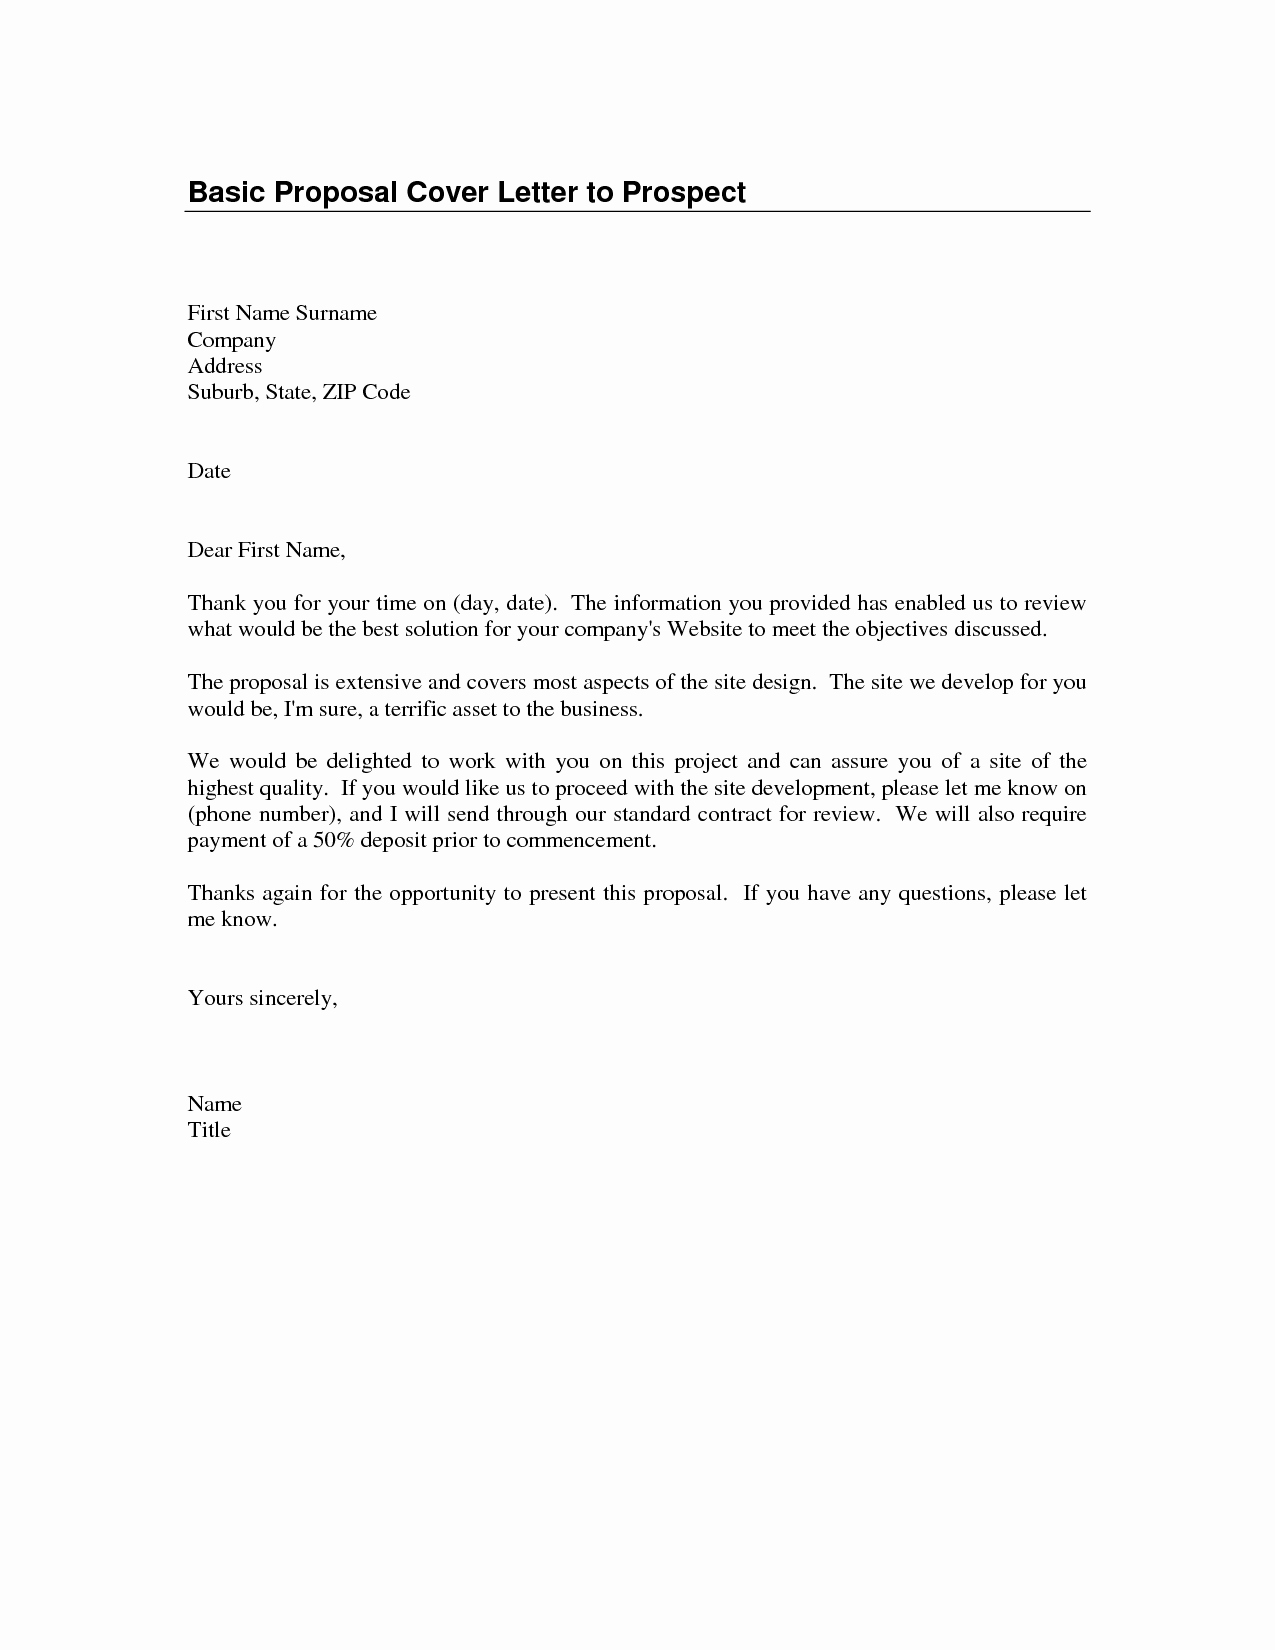 Cover Letter Examples Awesome All Cover Letter Samples for Professionals